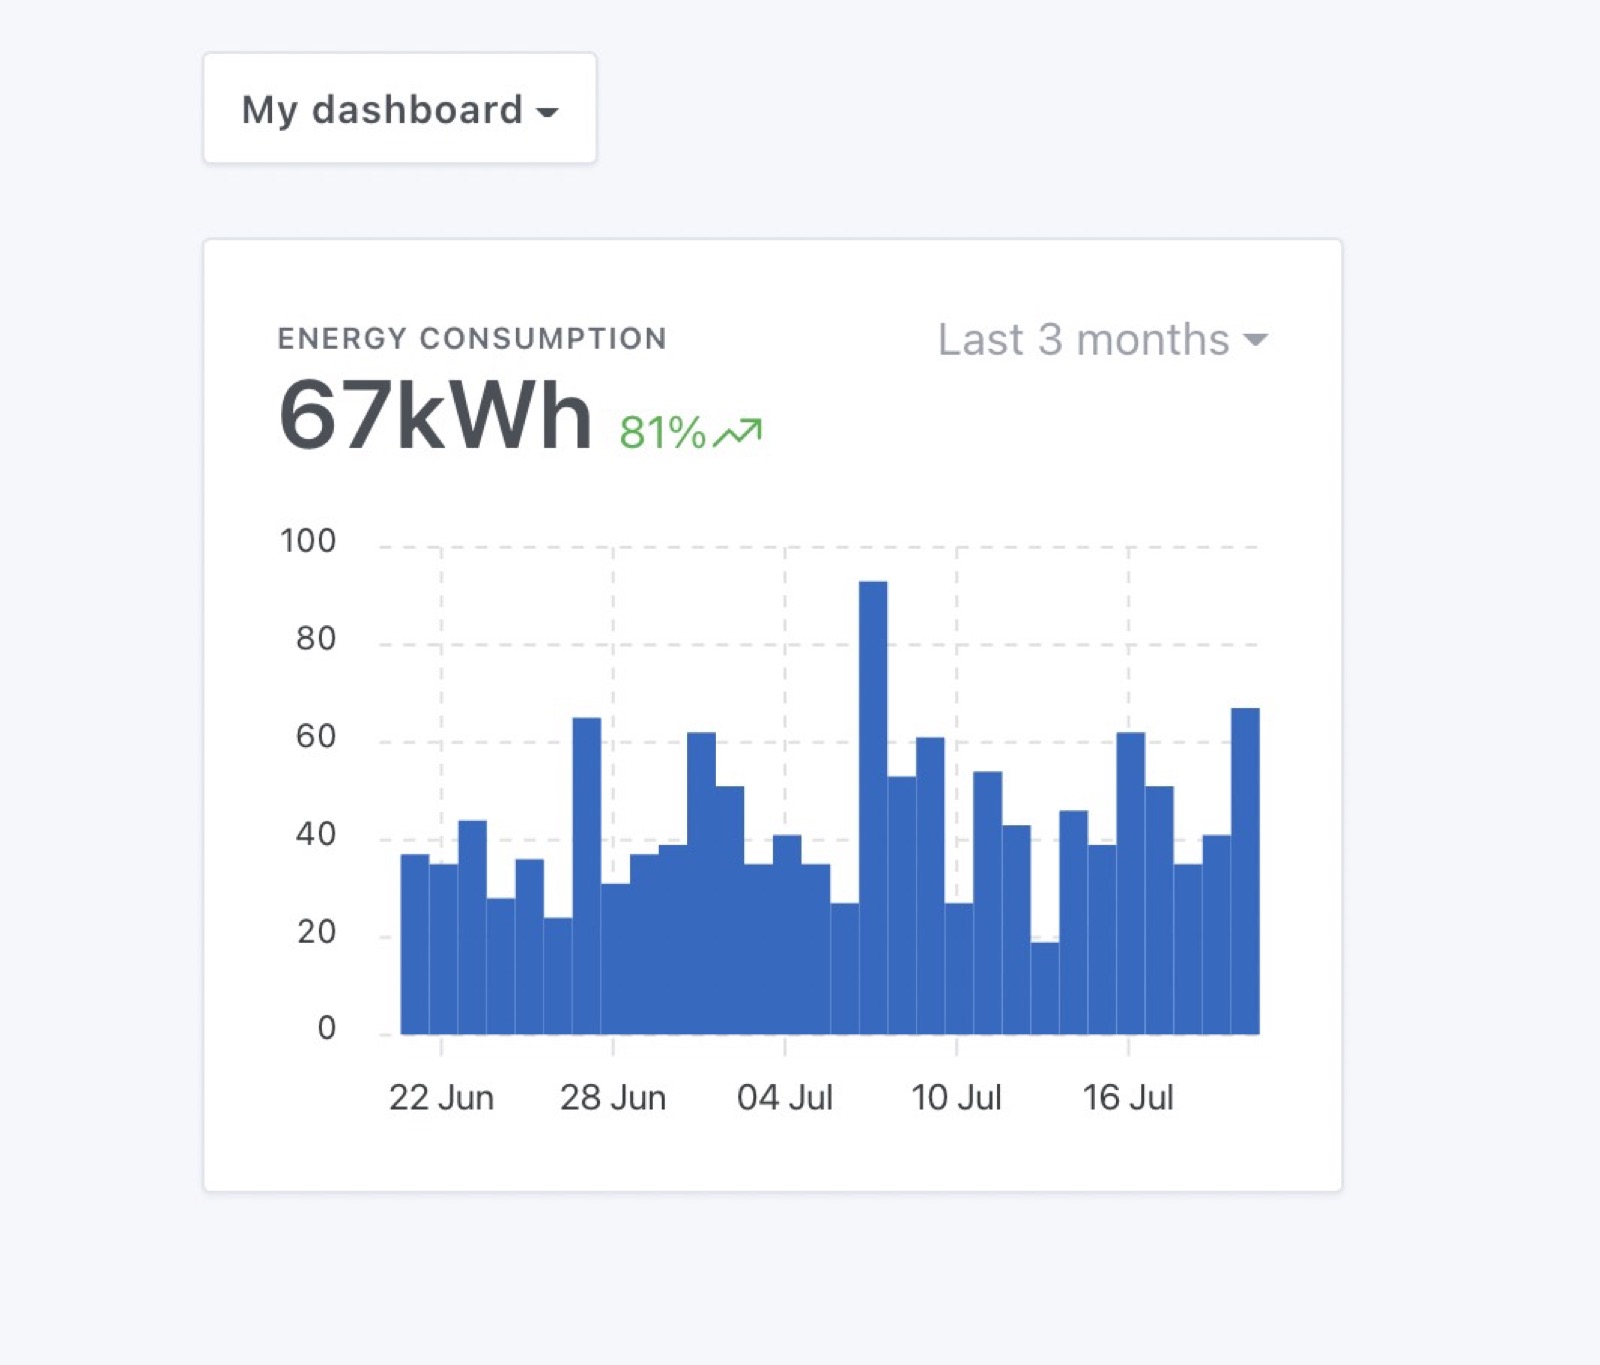 Energy consumption display with bar chart